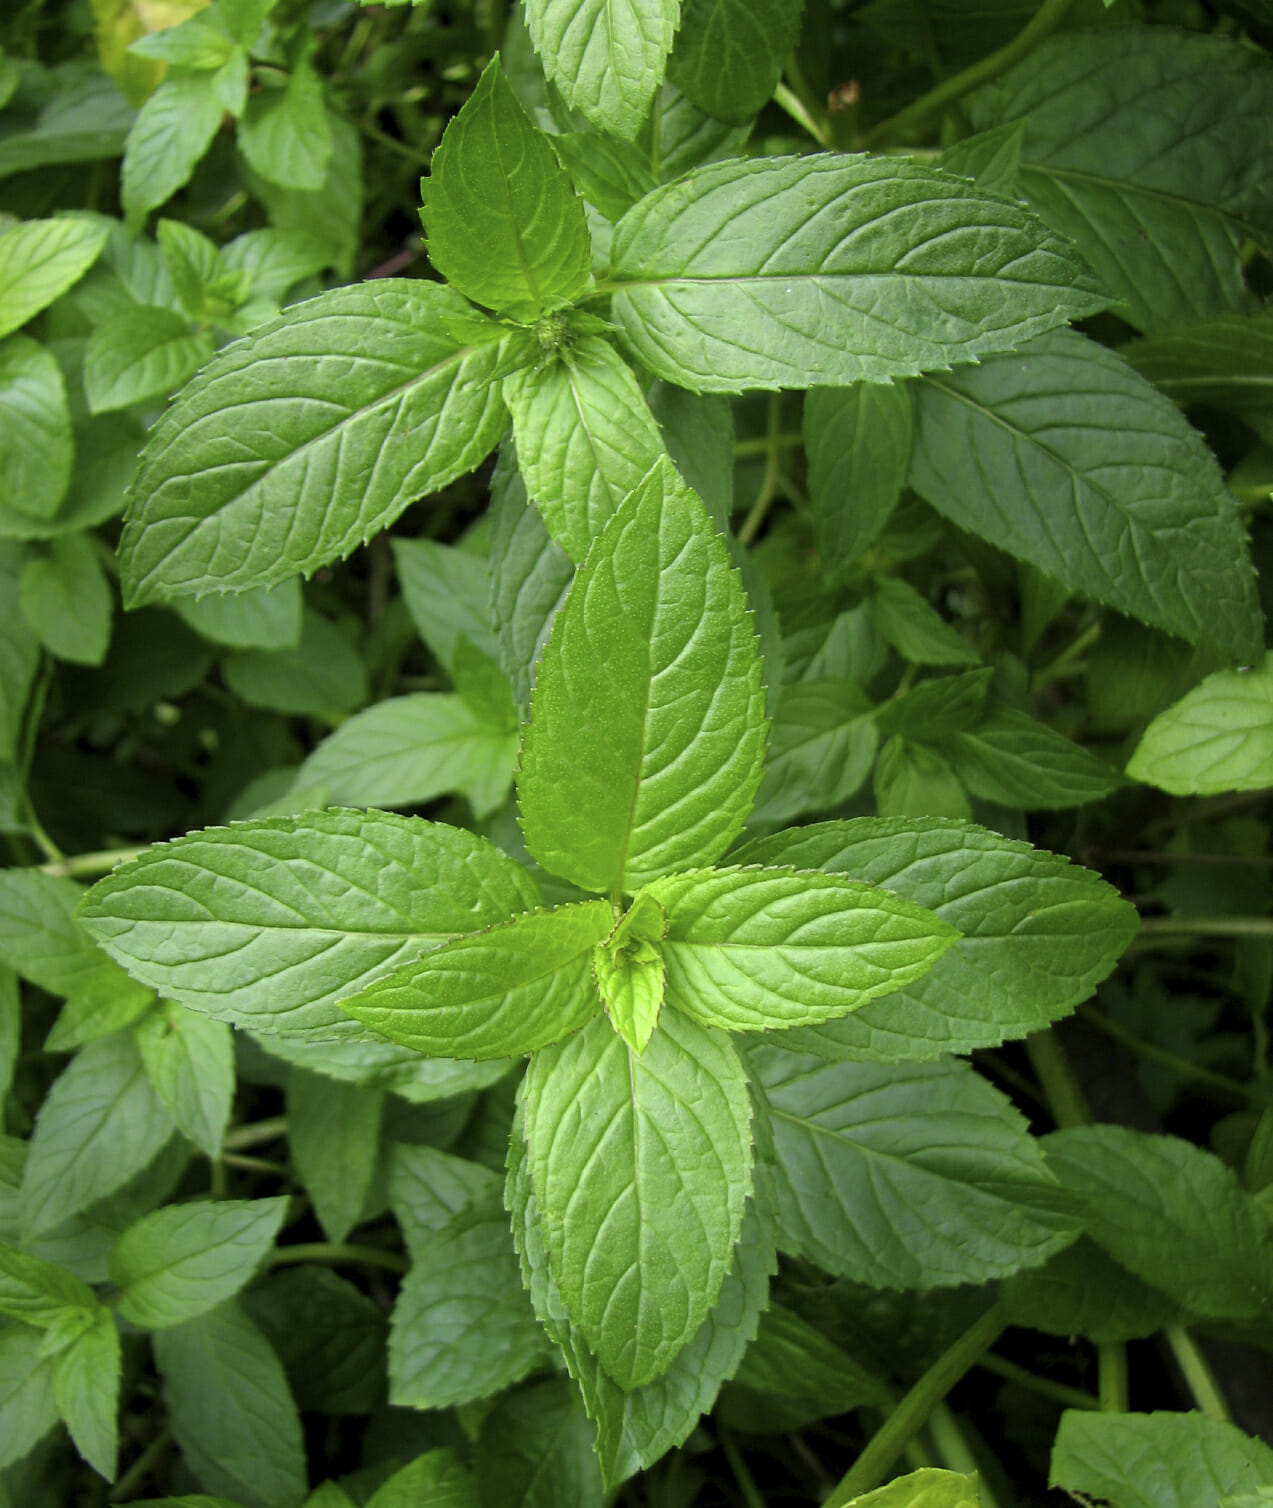 Plants That Repel Mosquitoes